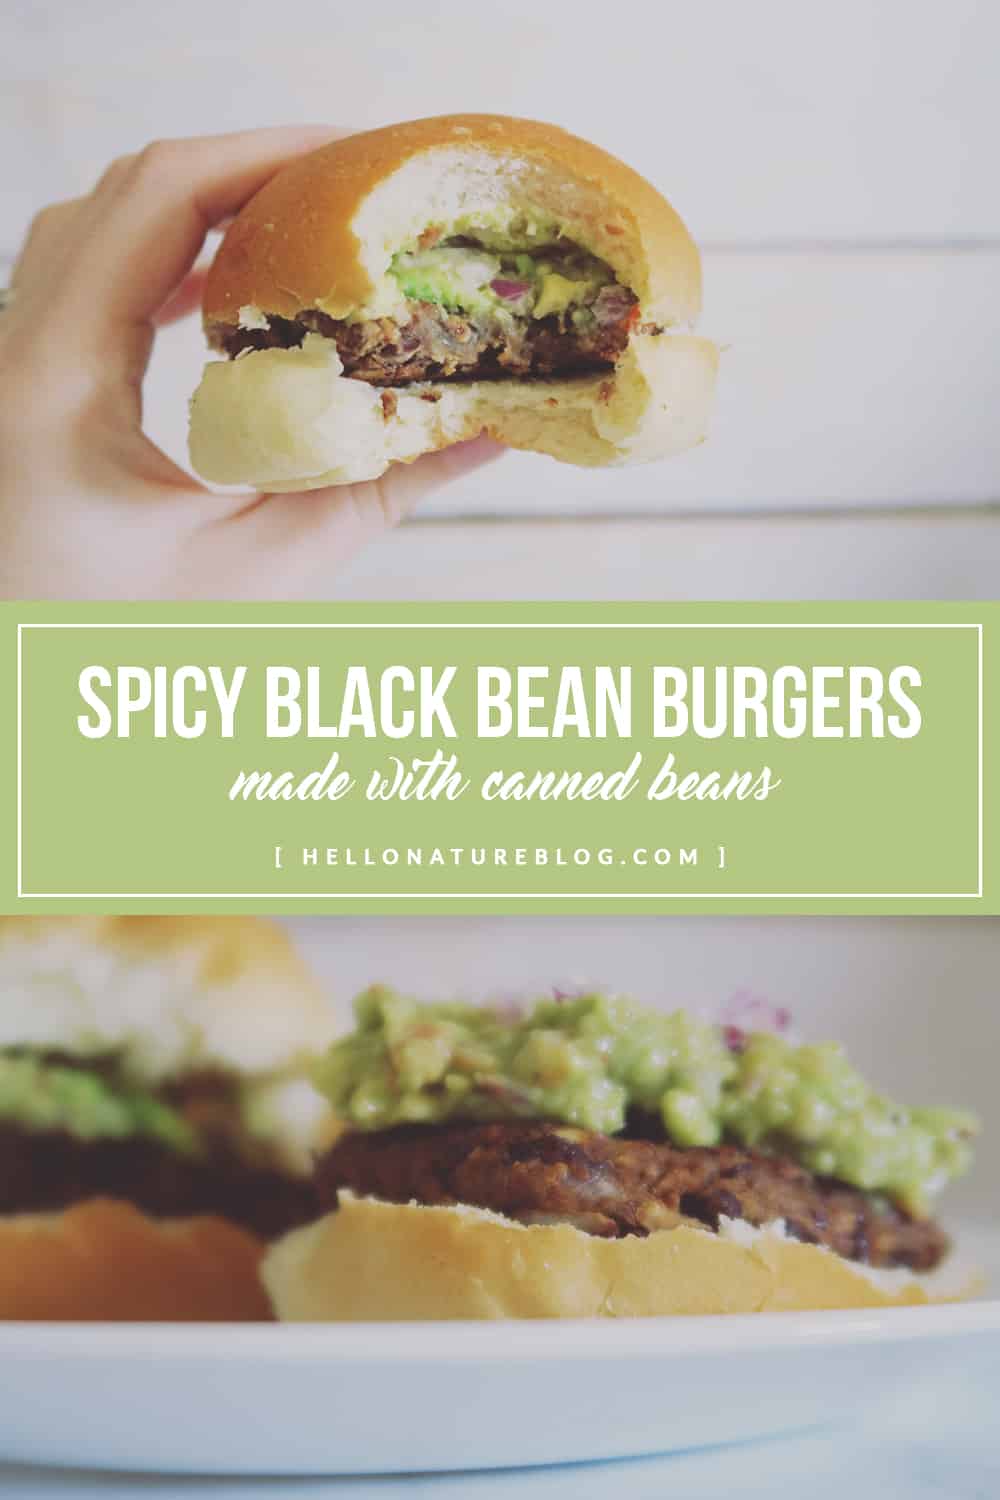 Add a little bit of zest to your life with this spicy black bean burger recipe. Made with canned beans and simple pantry ingredients!